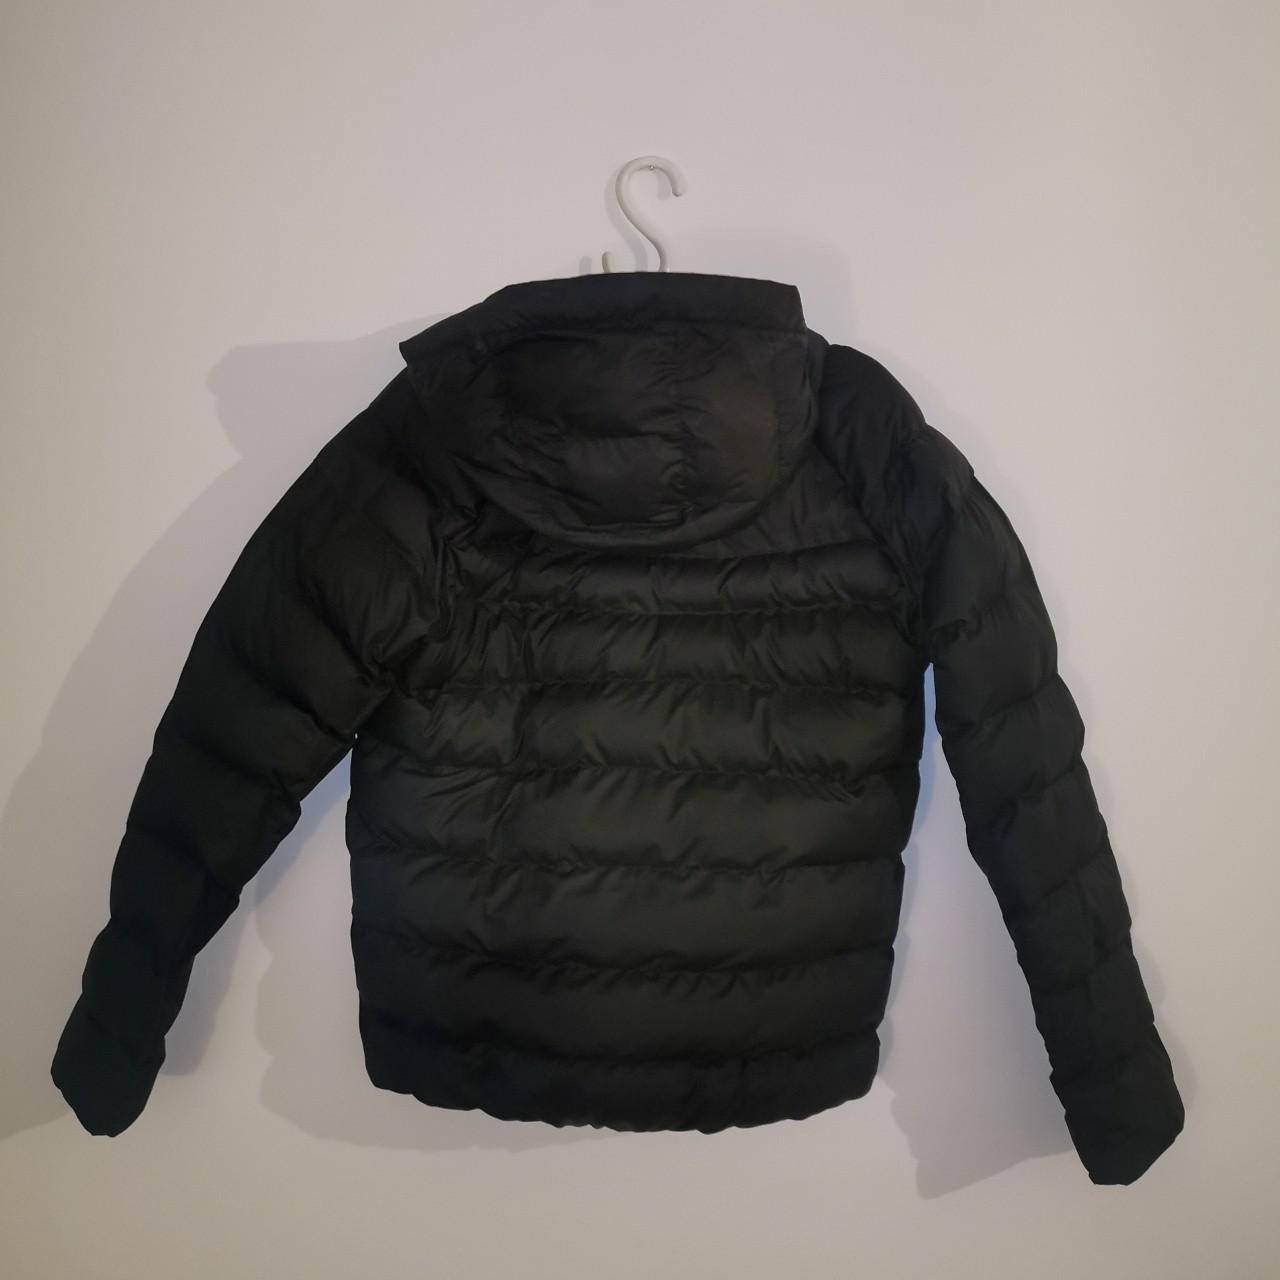 NIKE | PUFFER JACKET COLOUR: Black/Blue with white... - Depop